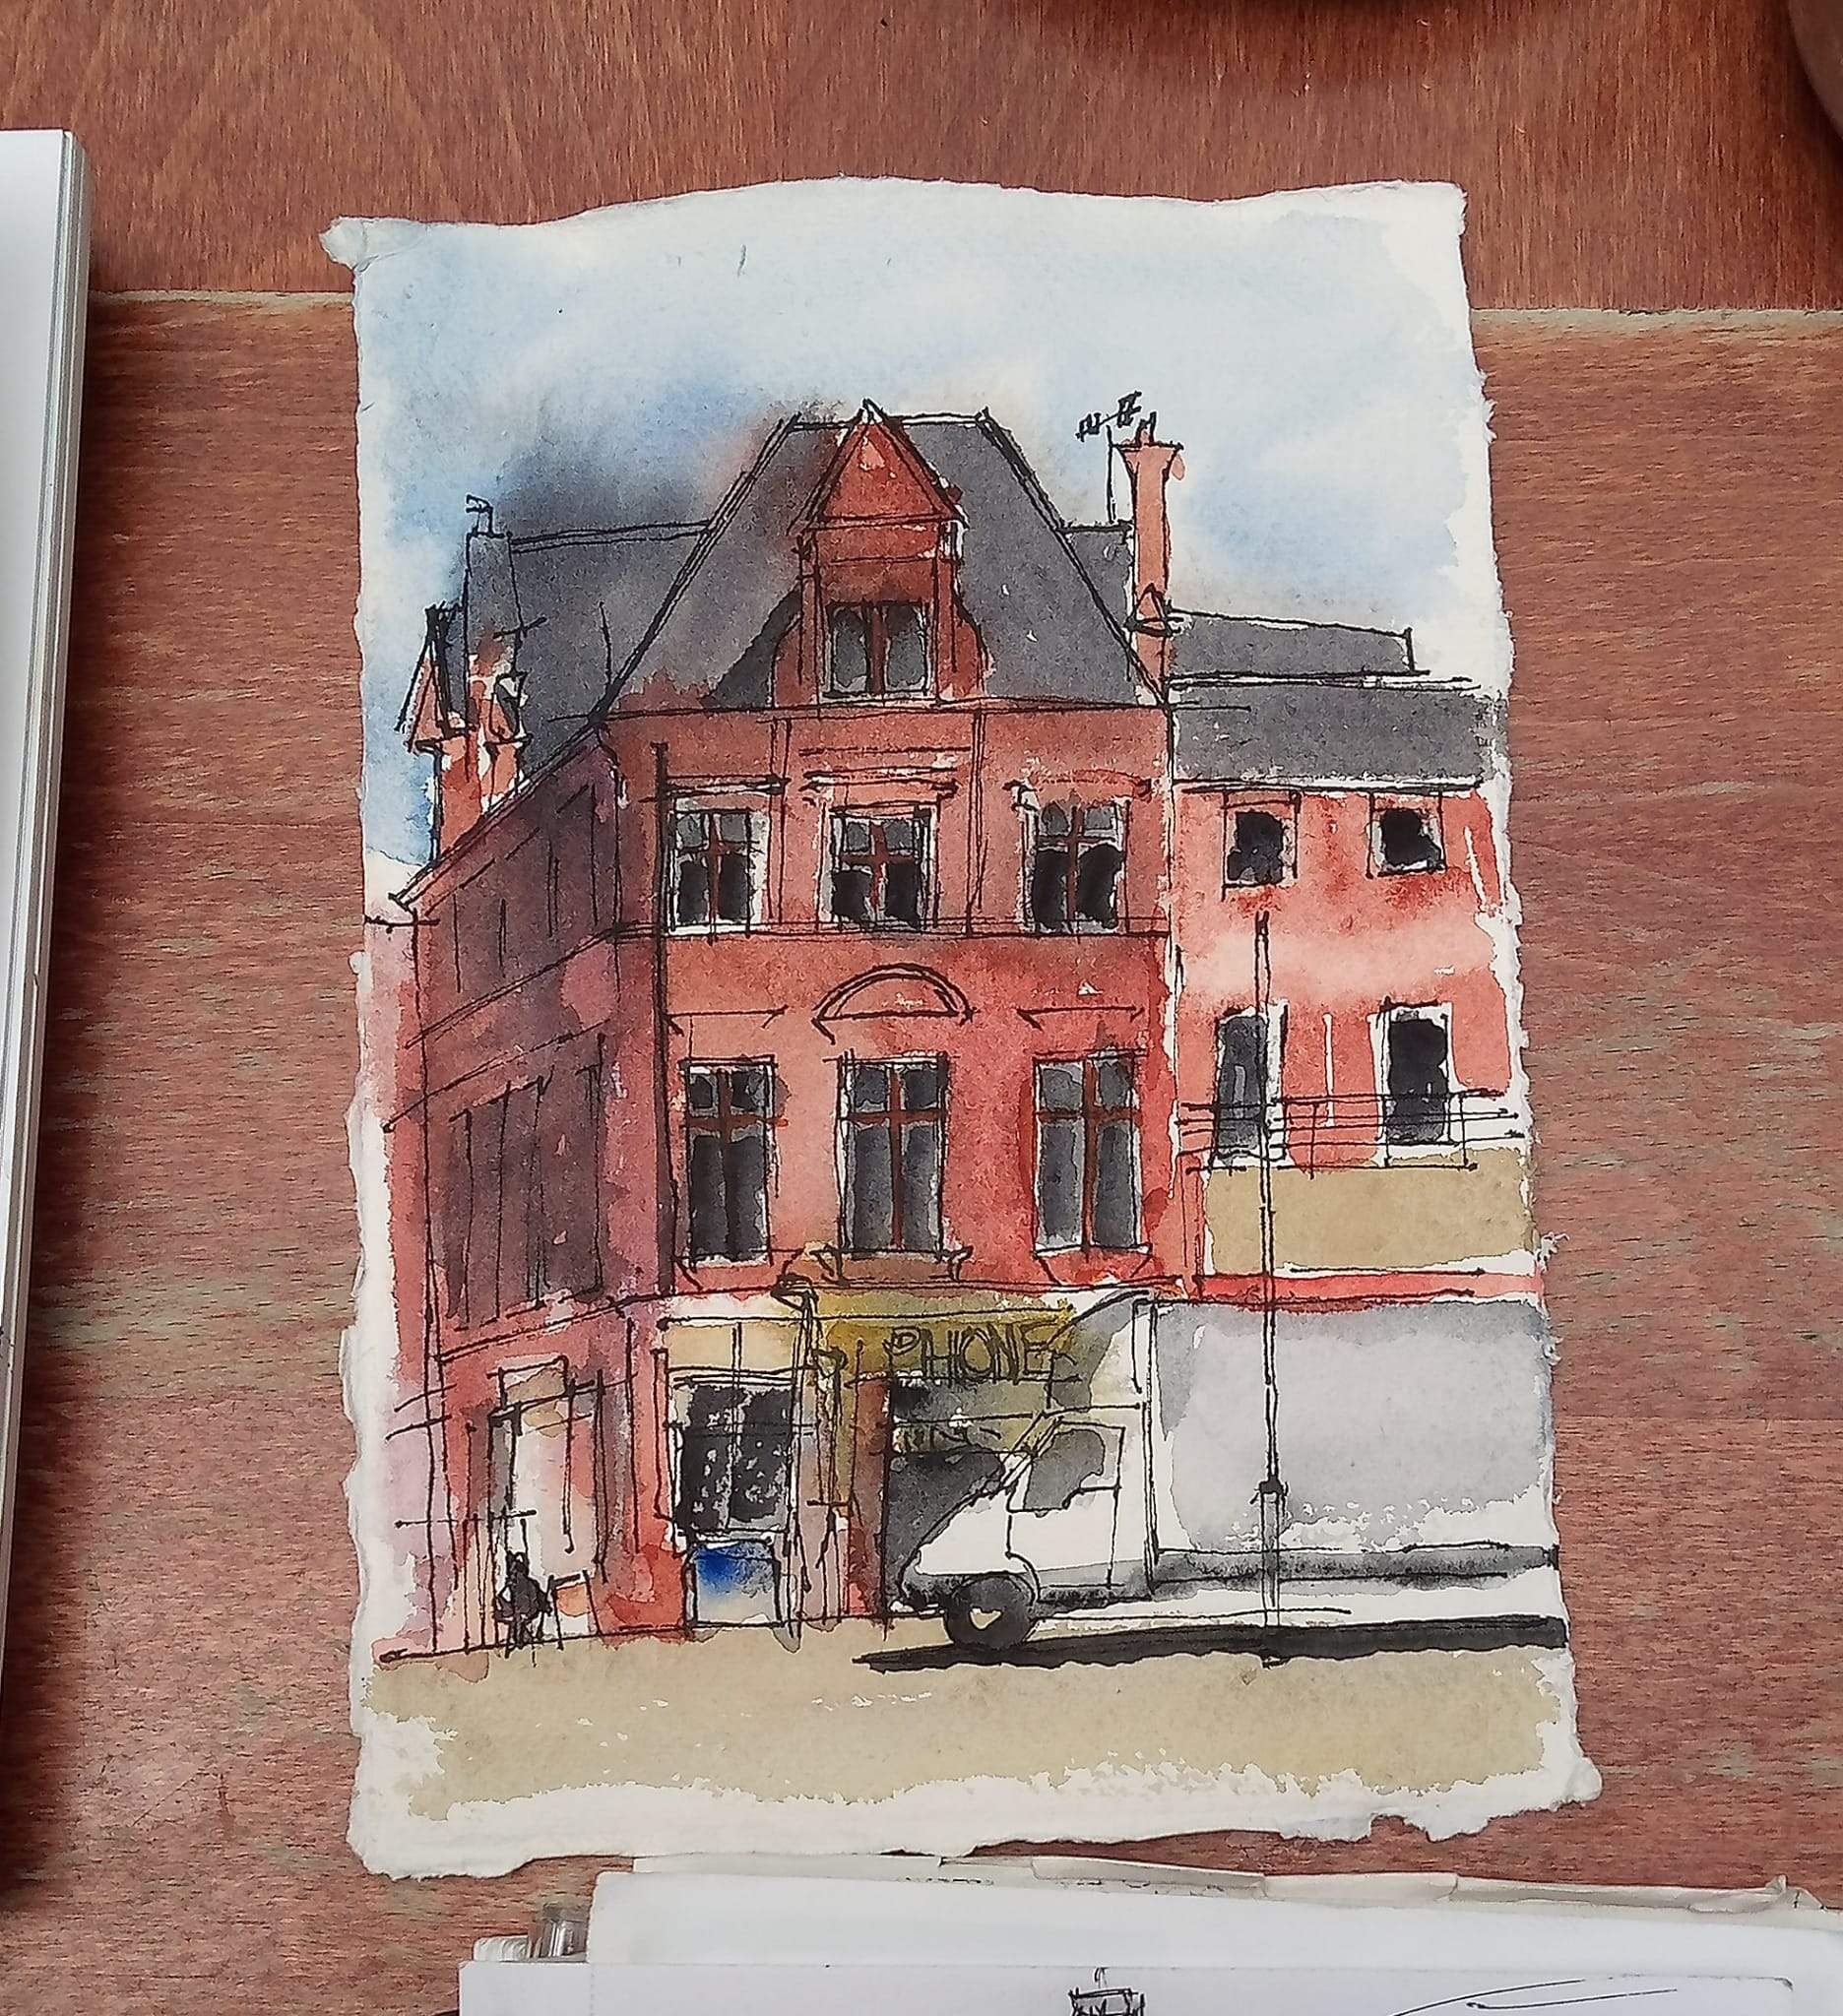 Enhancing depth and Perspective in urban sketching tips with Downtown urban sketchers in Liverpool